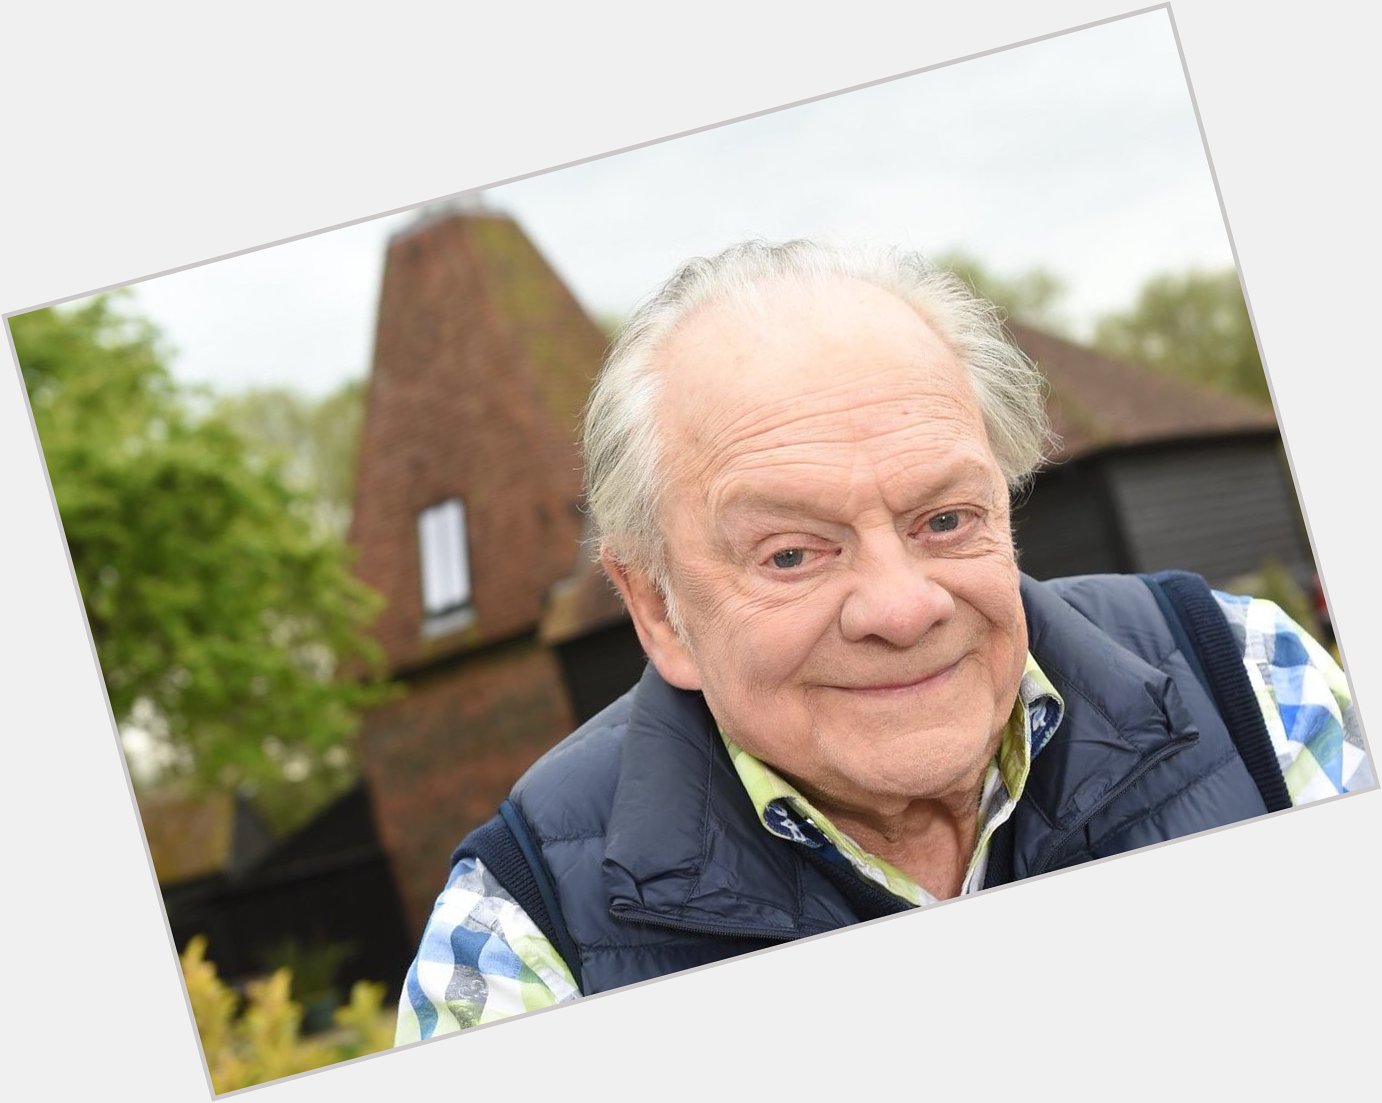 Blimmy Del Boy is 80 years young today. Happy birthday David Jason 